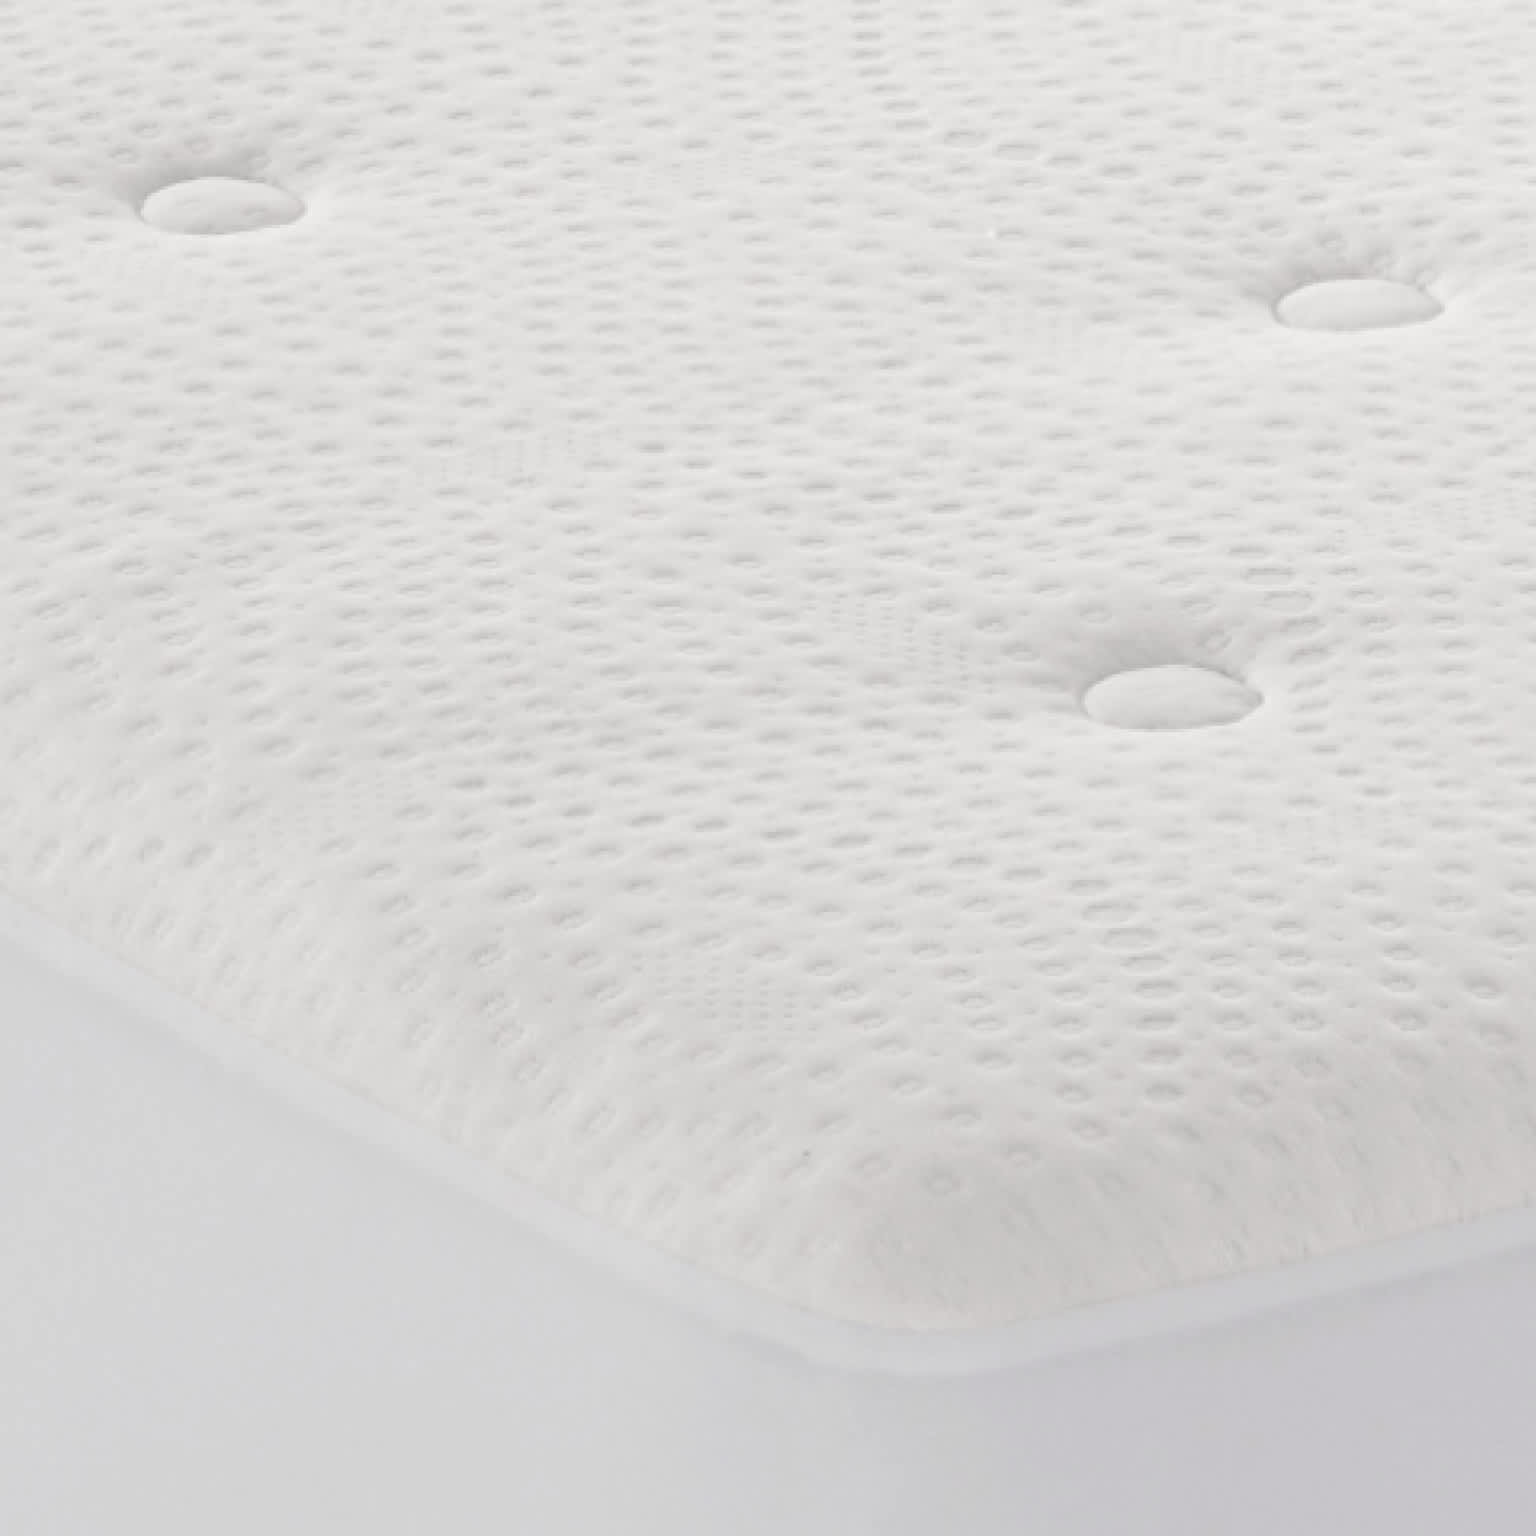 Mattress Toppers, Pads, and Protectors - Sleep Number